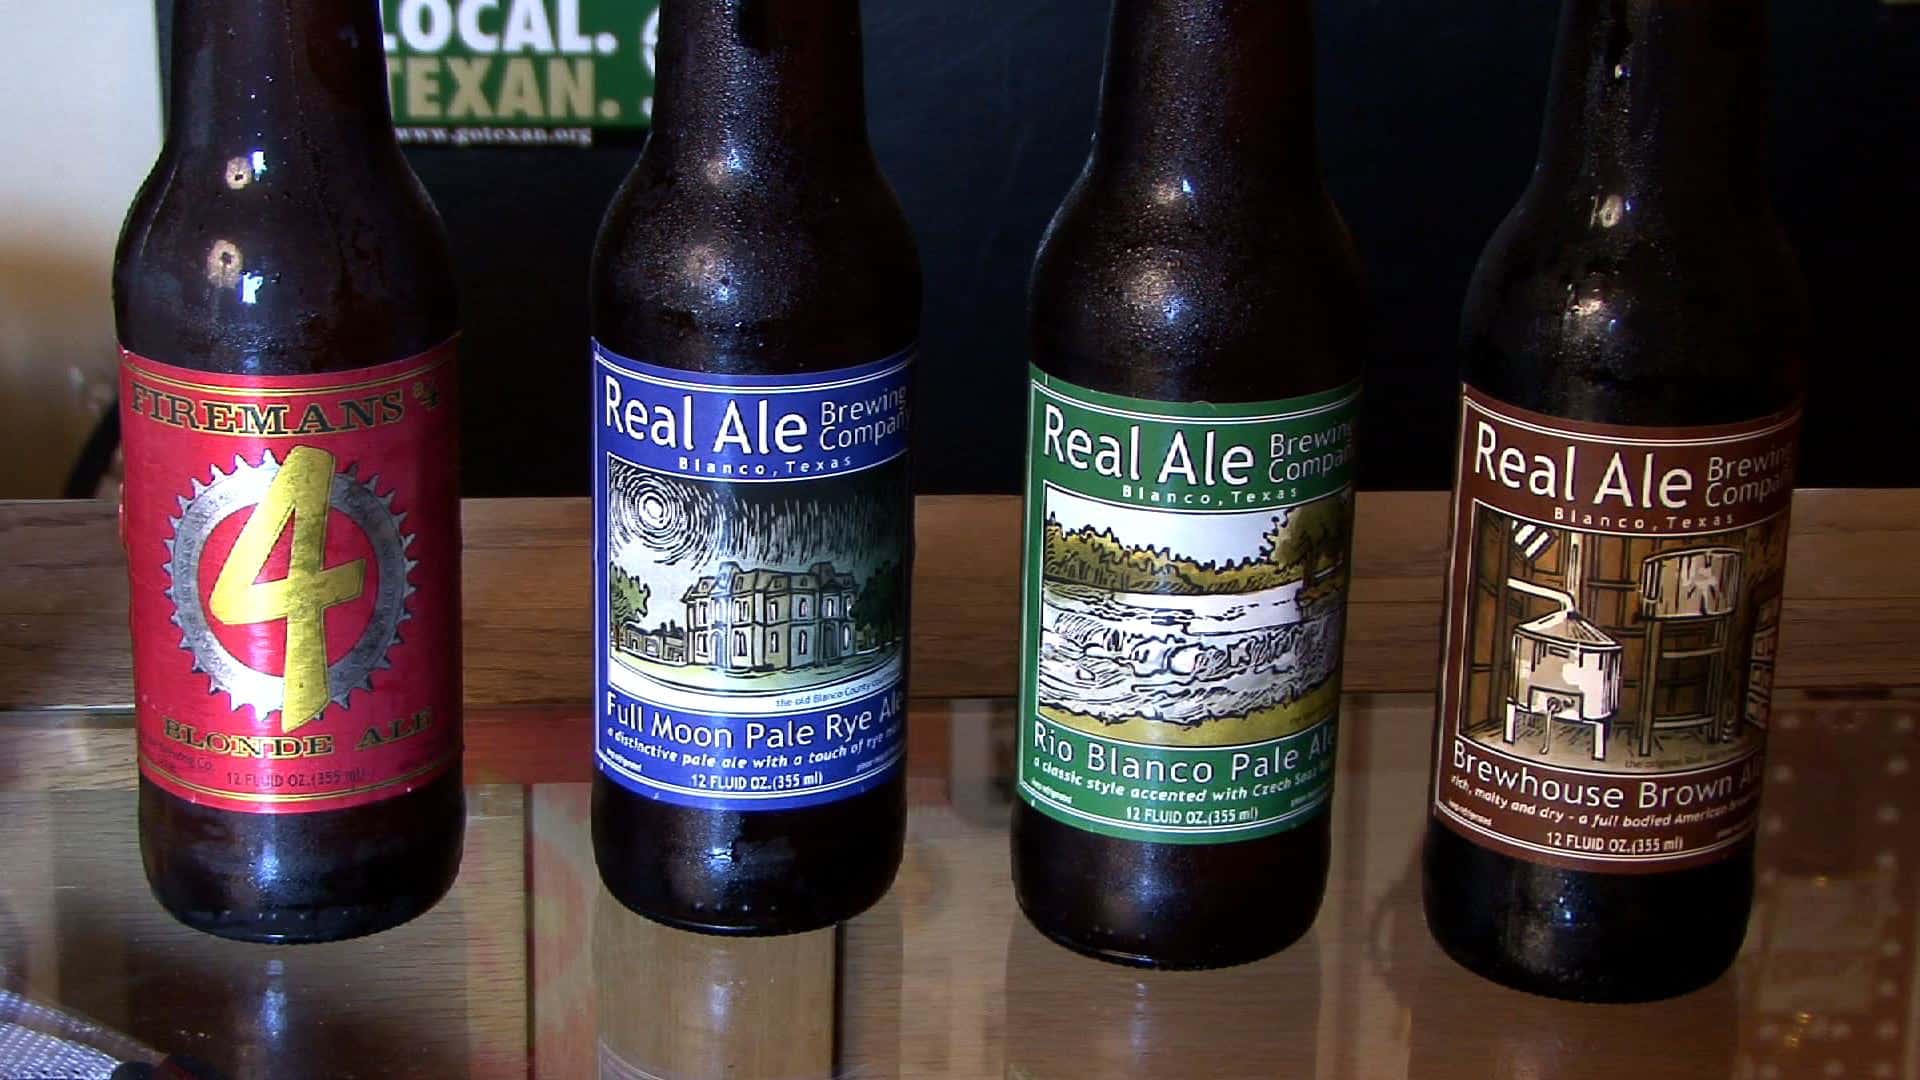 Real Ale Brewing Co.